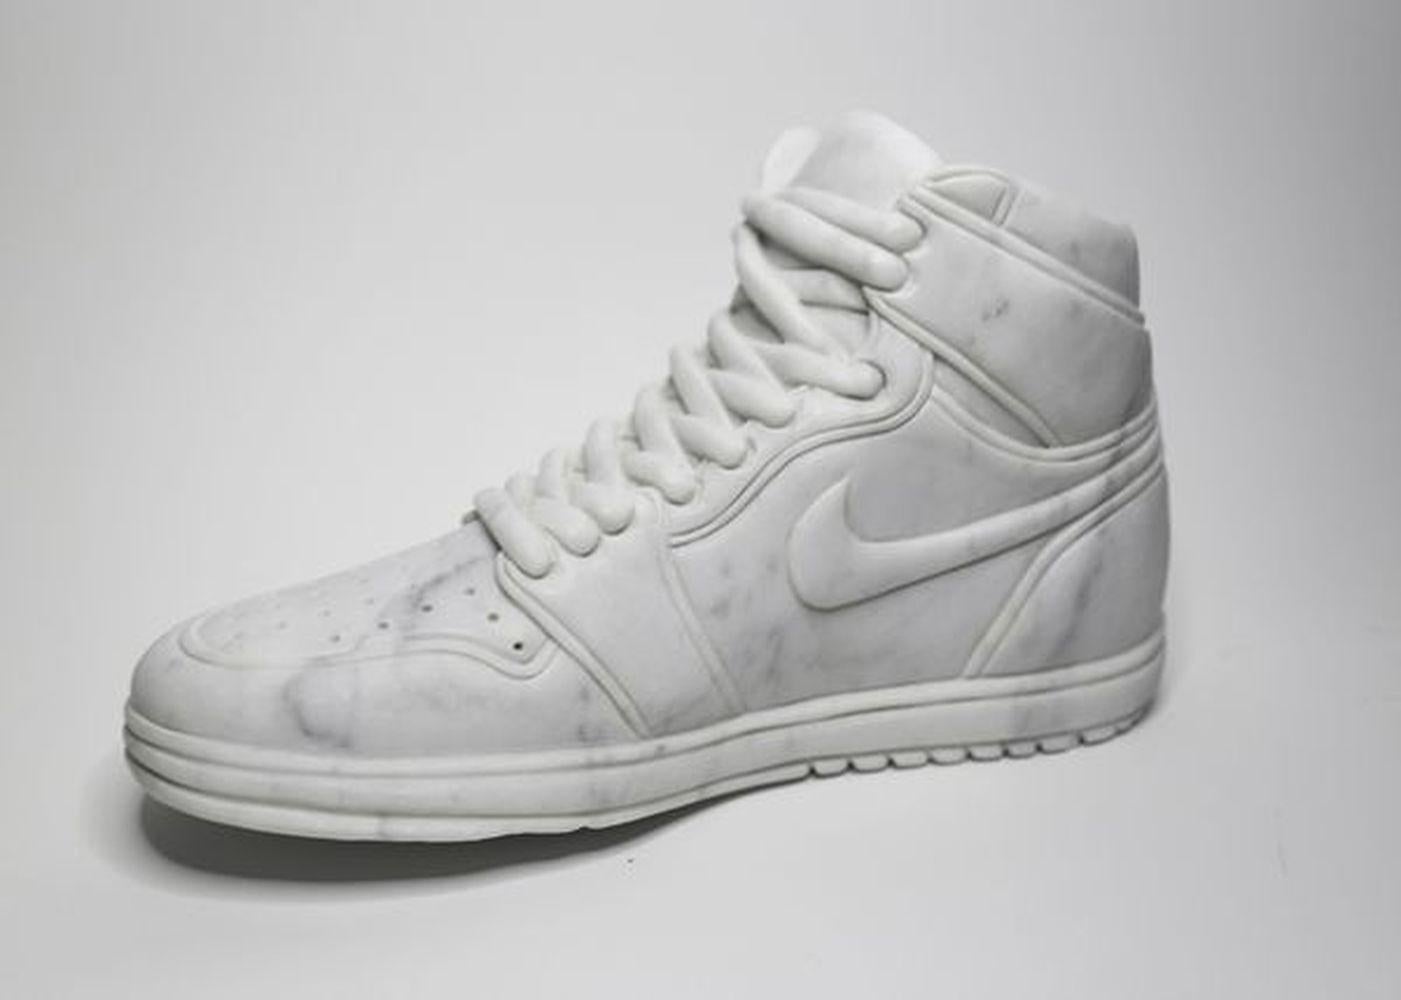 Frank Hollywood - White Marble Nike Shoes /Clothing and Fashion Sculpture /  "His Airness" For Sale at 1stDibs